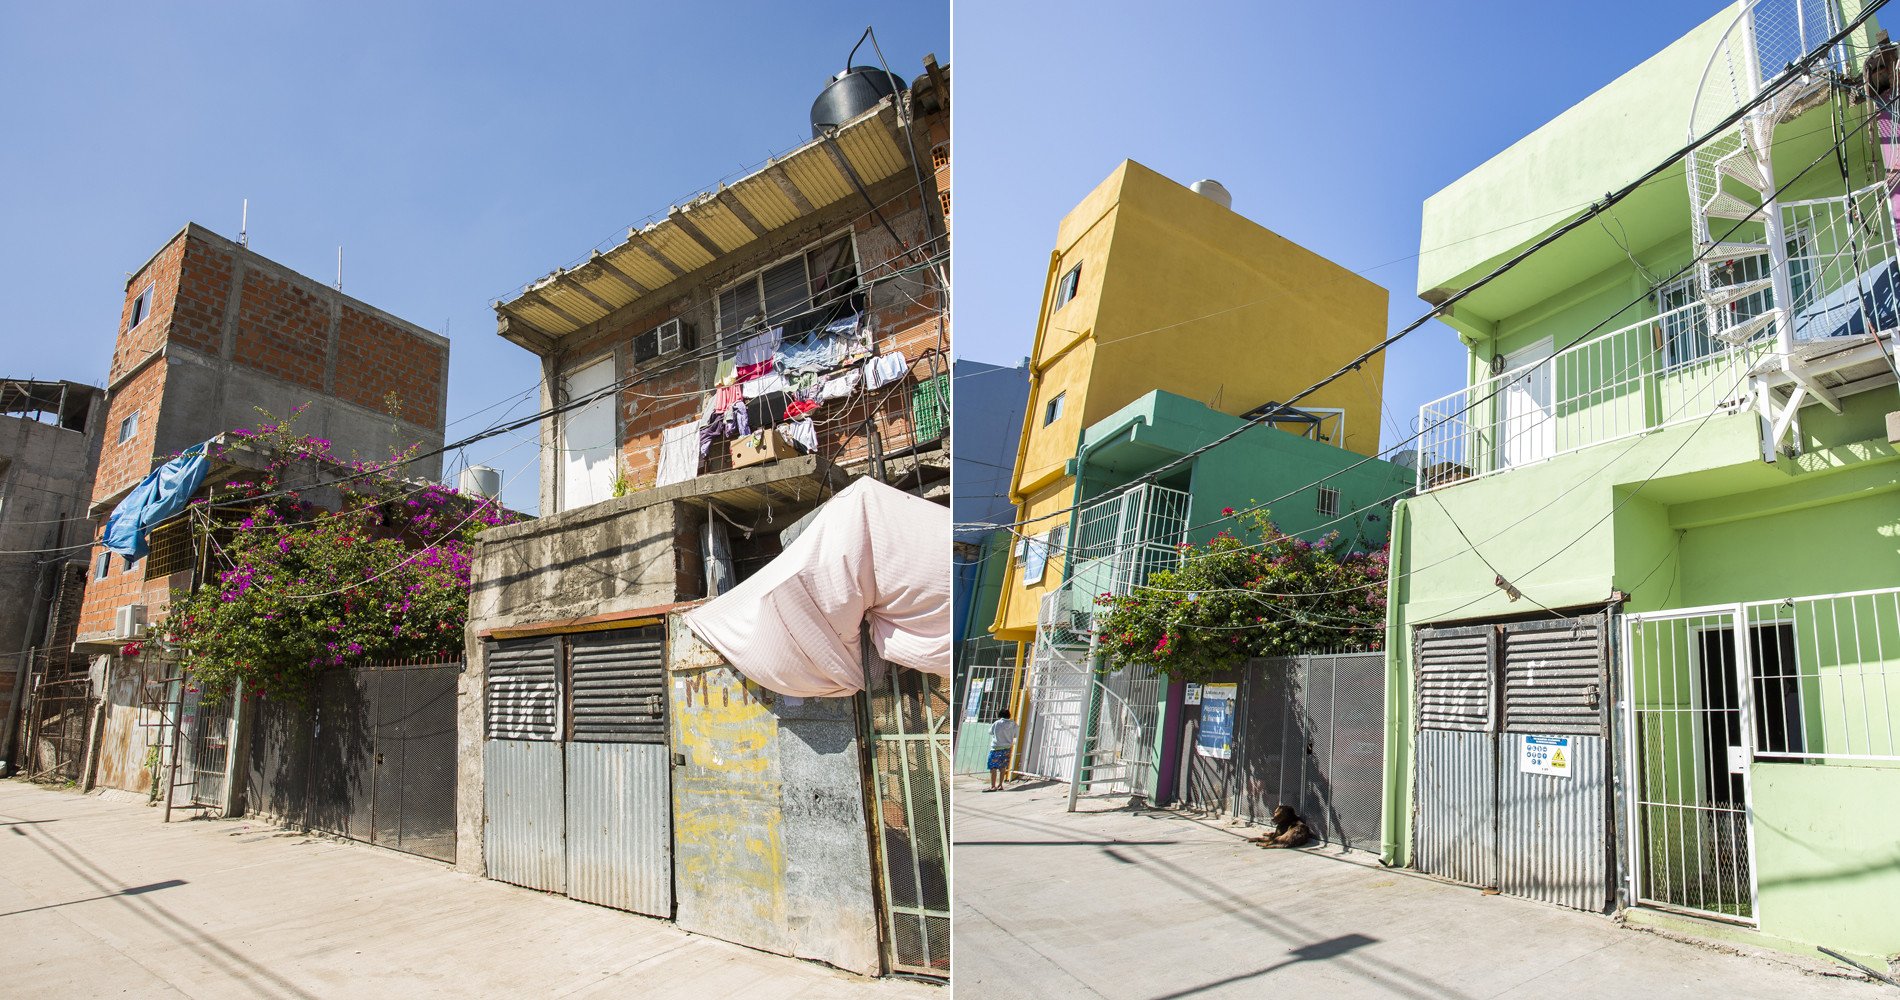 Example of housing improvements in Barrio Mugica.